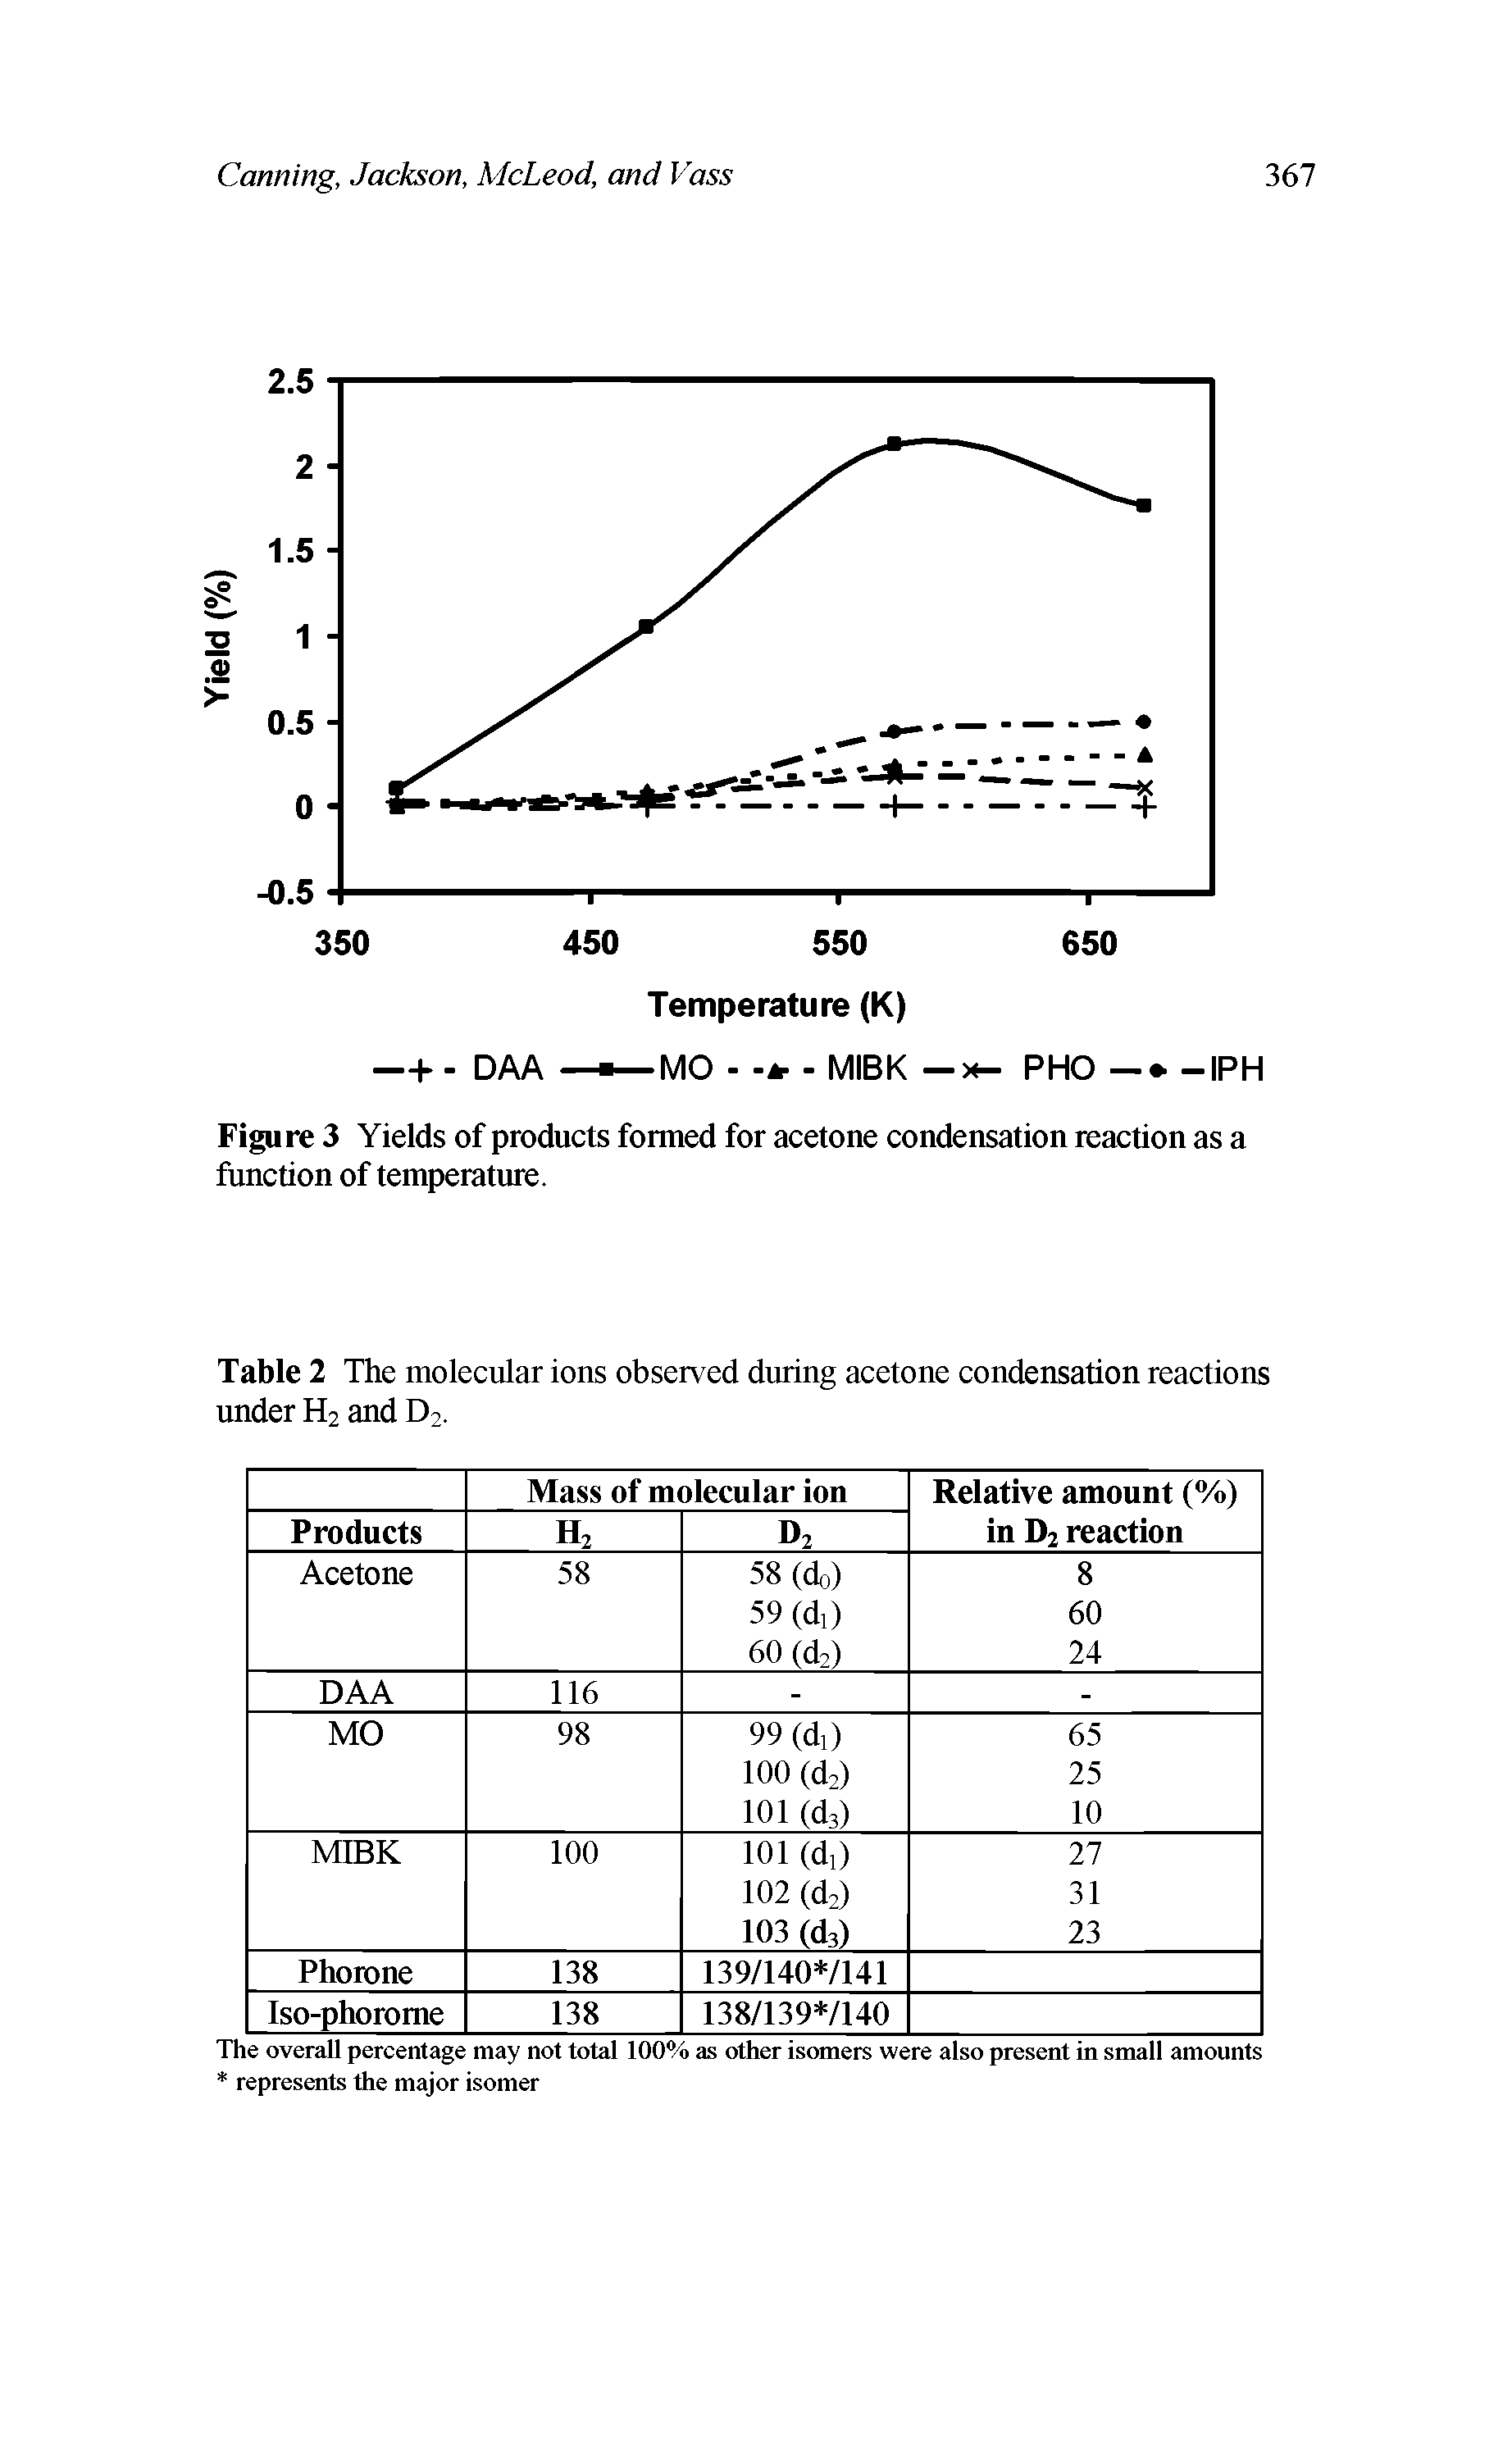 Figure 3 Yields of products formed for acetone condensation reaction as a function of temperature.